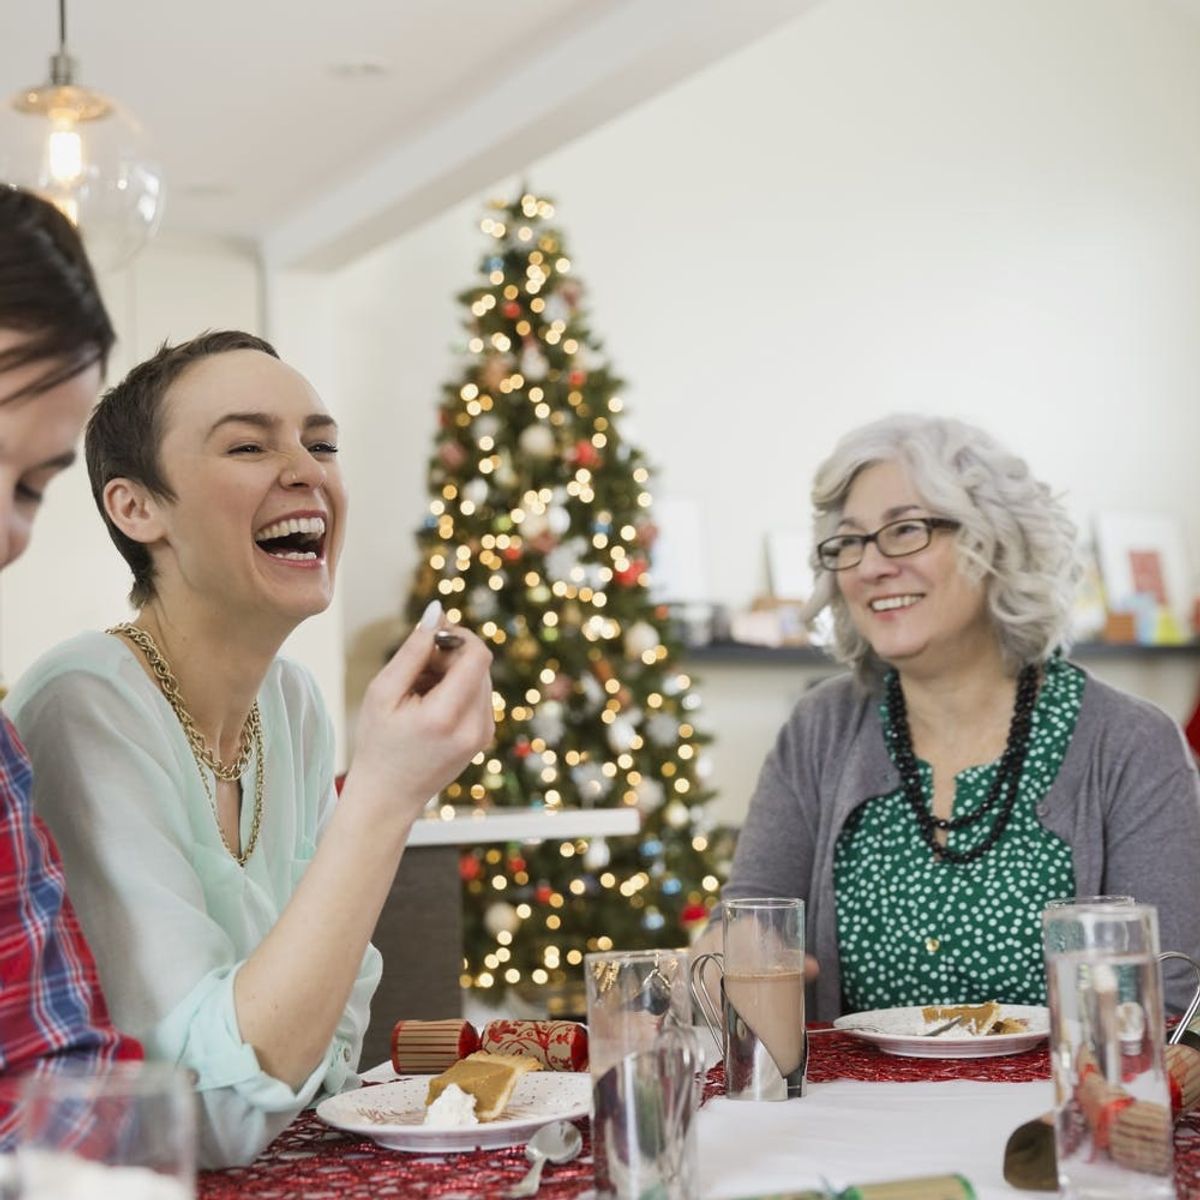 10 Fun Ideas for Grown-Up Family Time During the Holidays